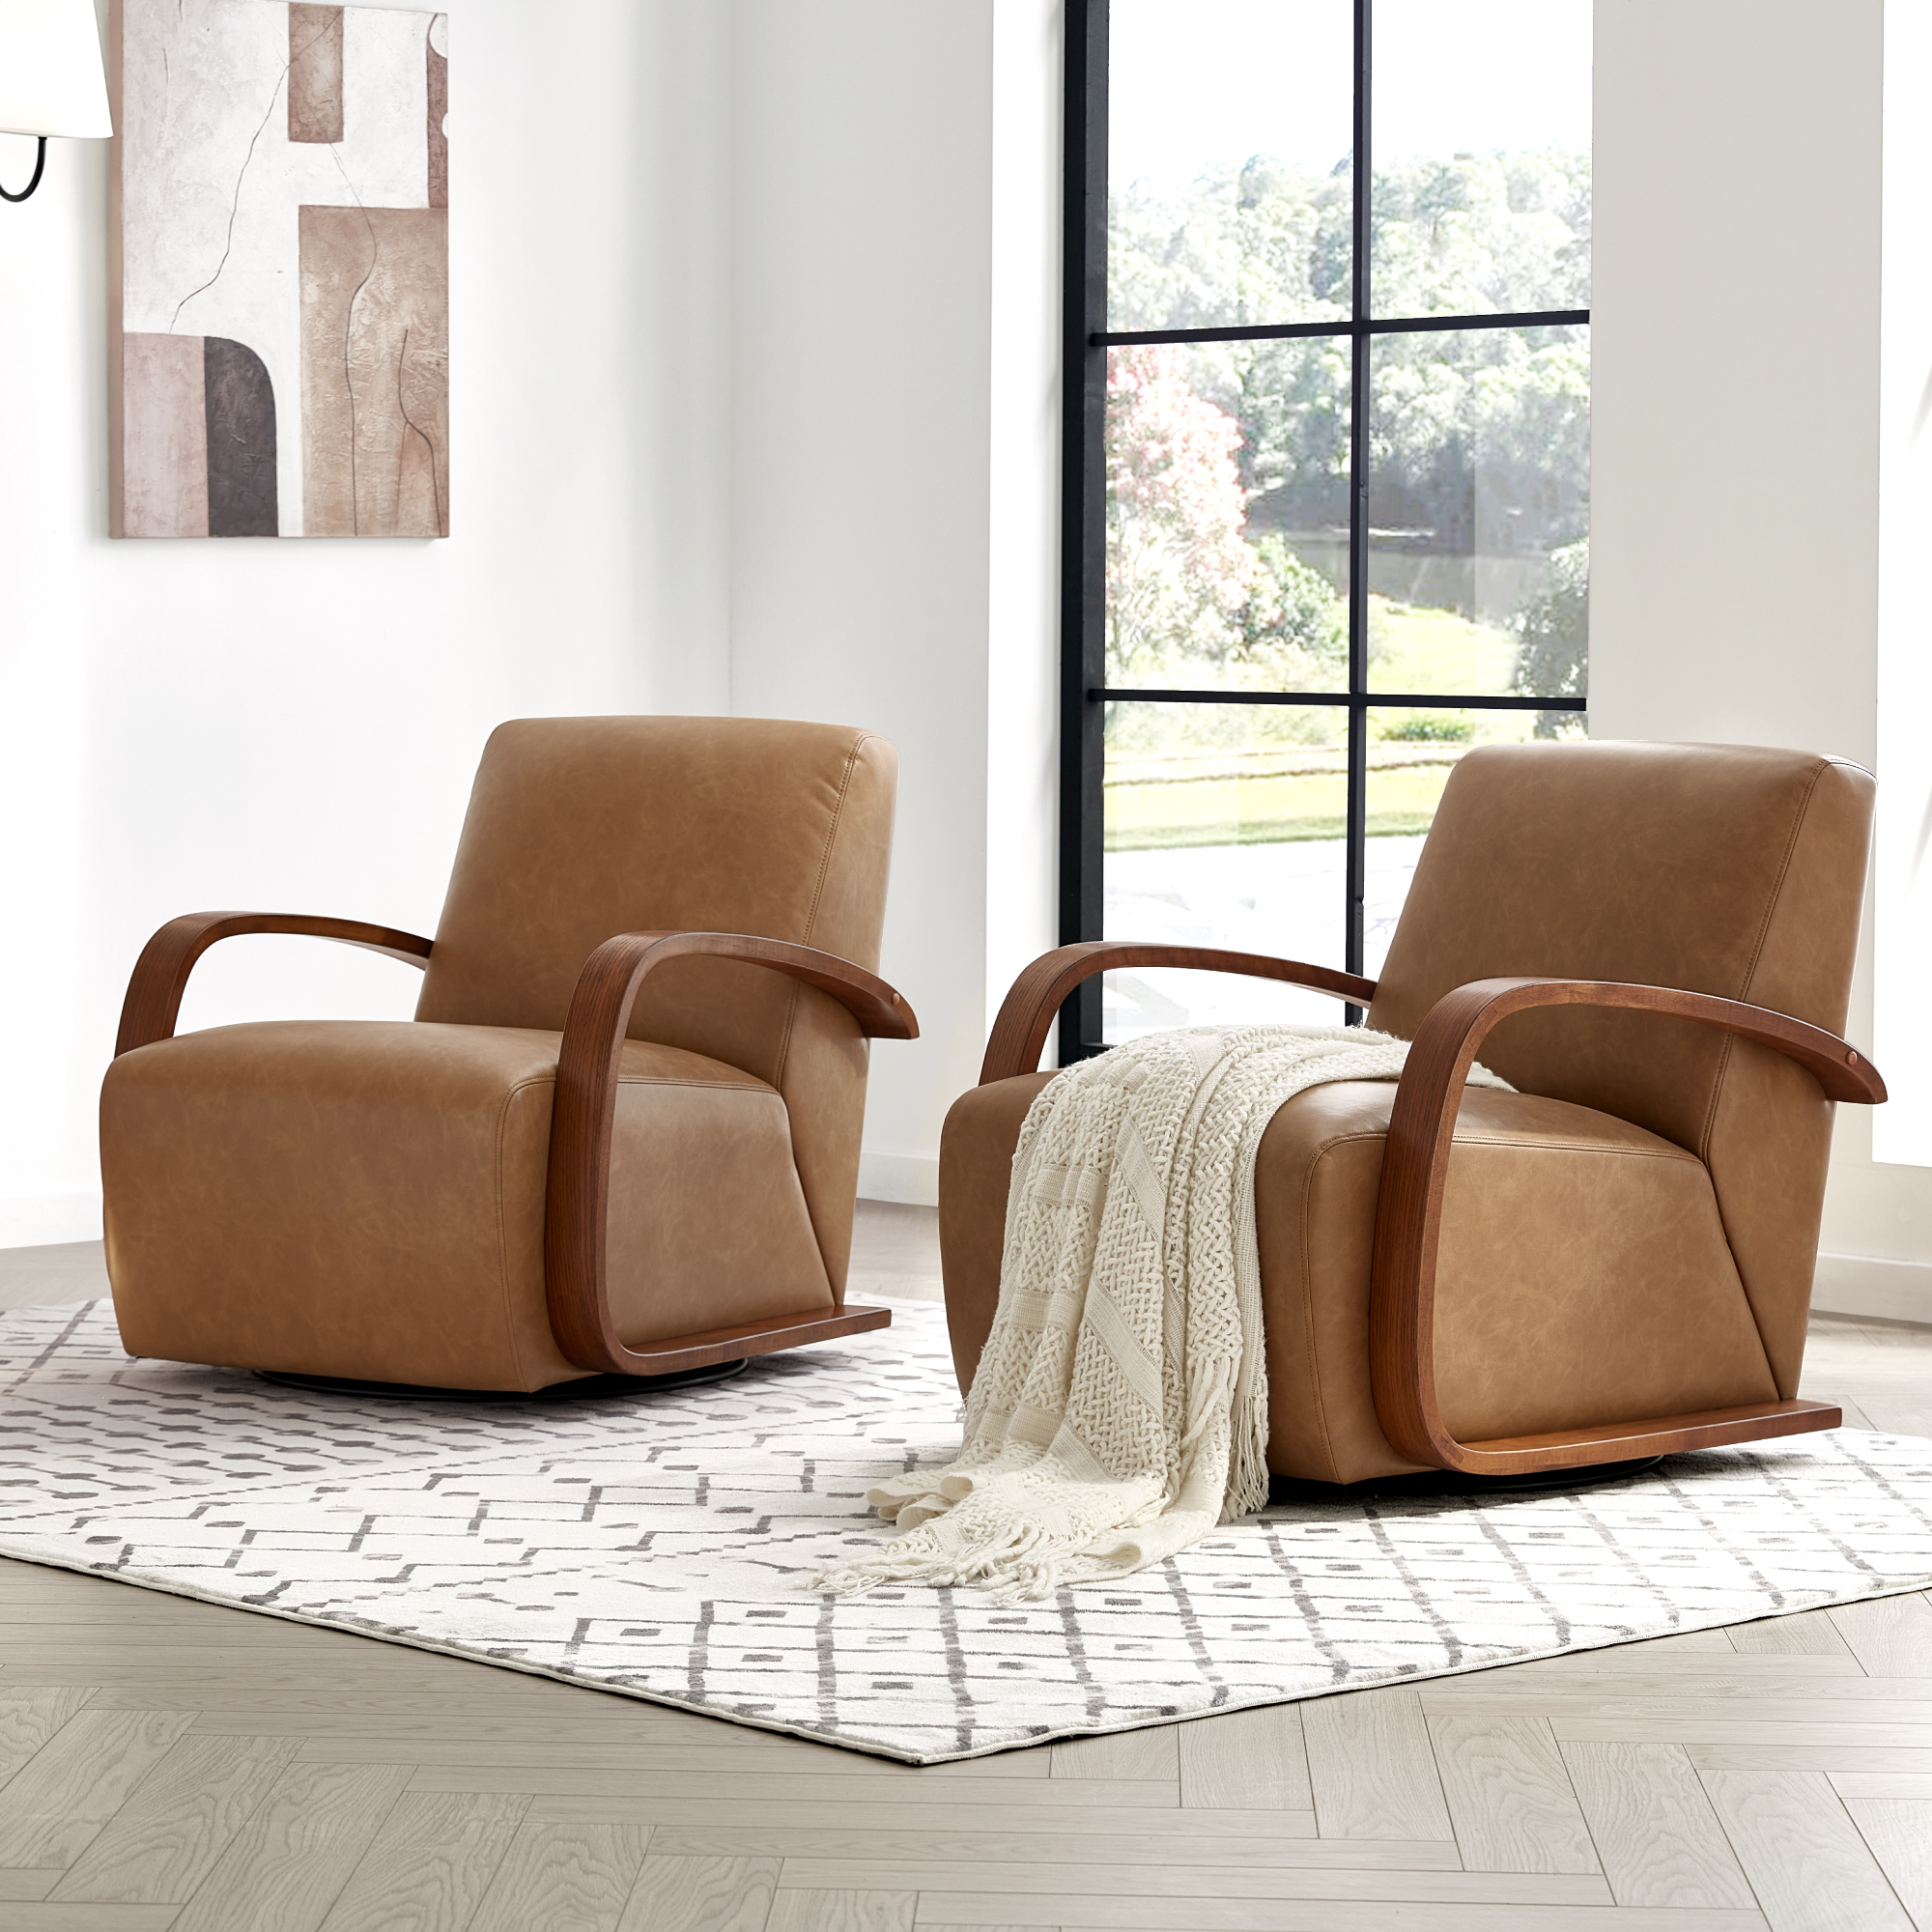 CHITA Swivel Accent Chair with U-shaped Wood Arm for Living Room Beedroom, Cognac Brown & Walnut - image 2 of 14